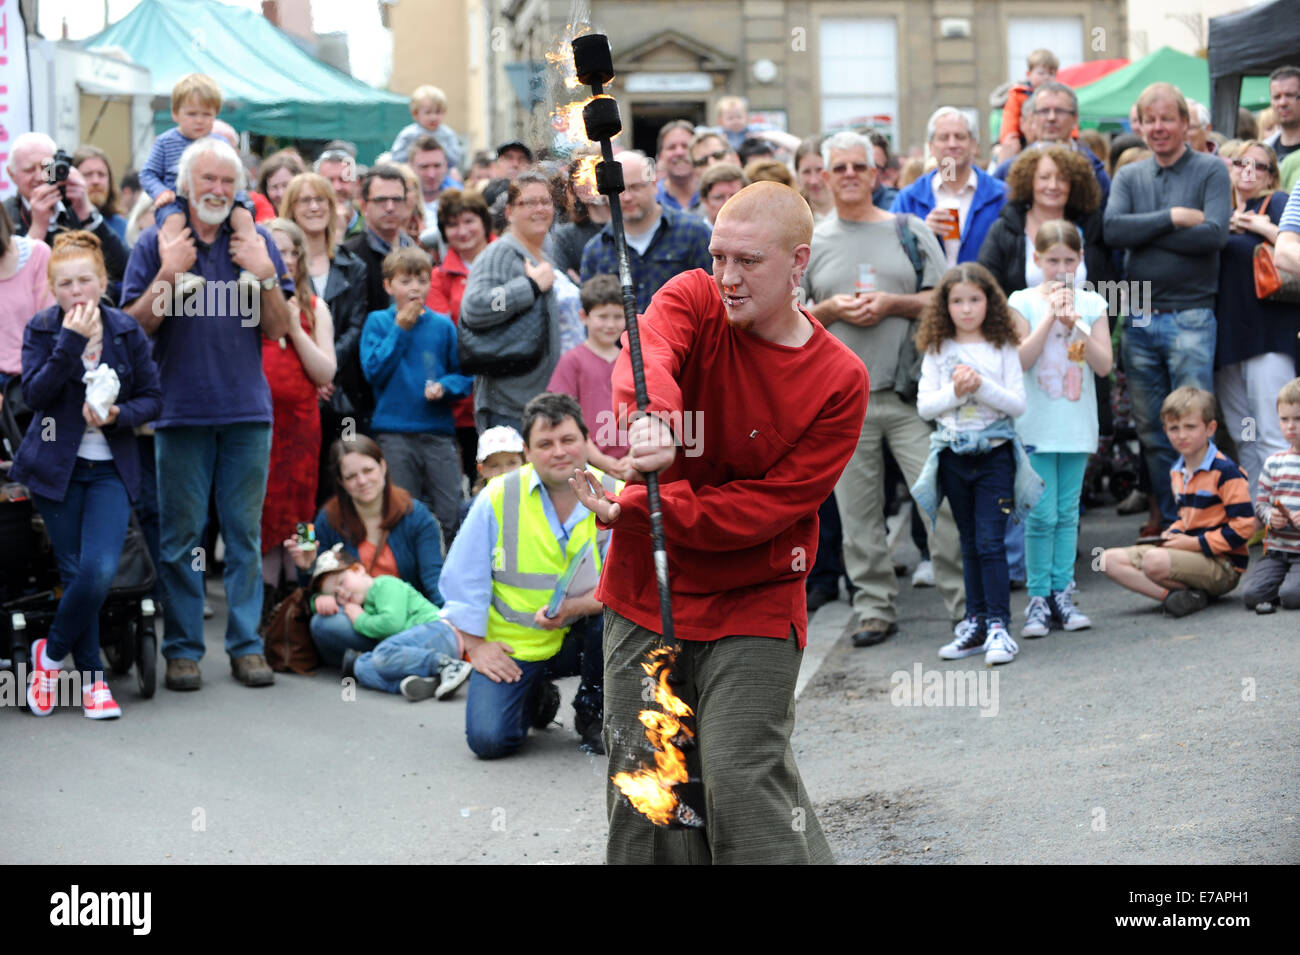 Fire juggler artist Stephen Margerison 'Mad Margy' of Snaibeach The Green Man Festival at Clun in Shropshire Stock Photo